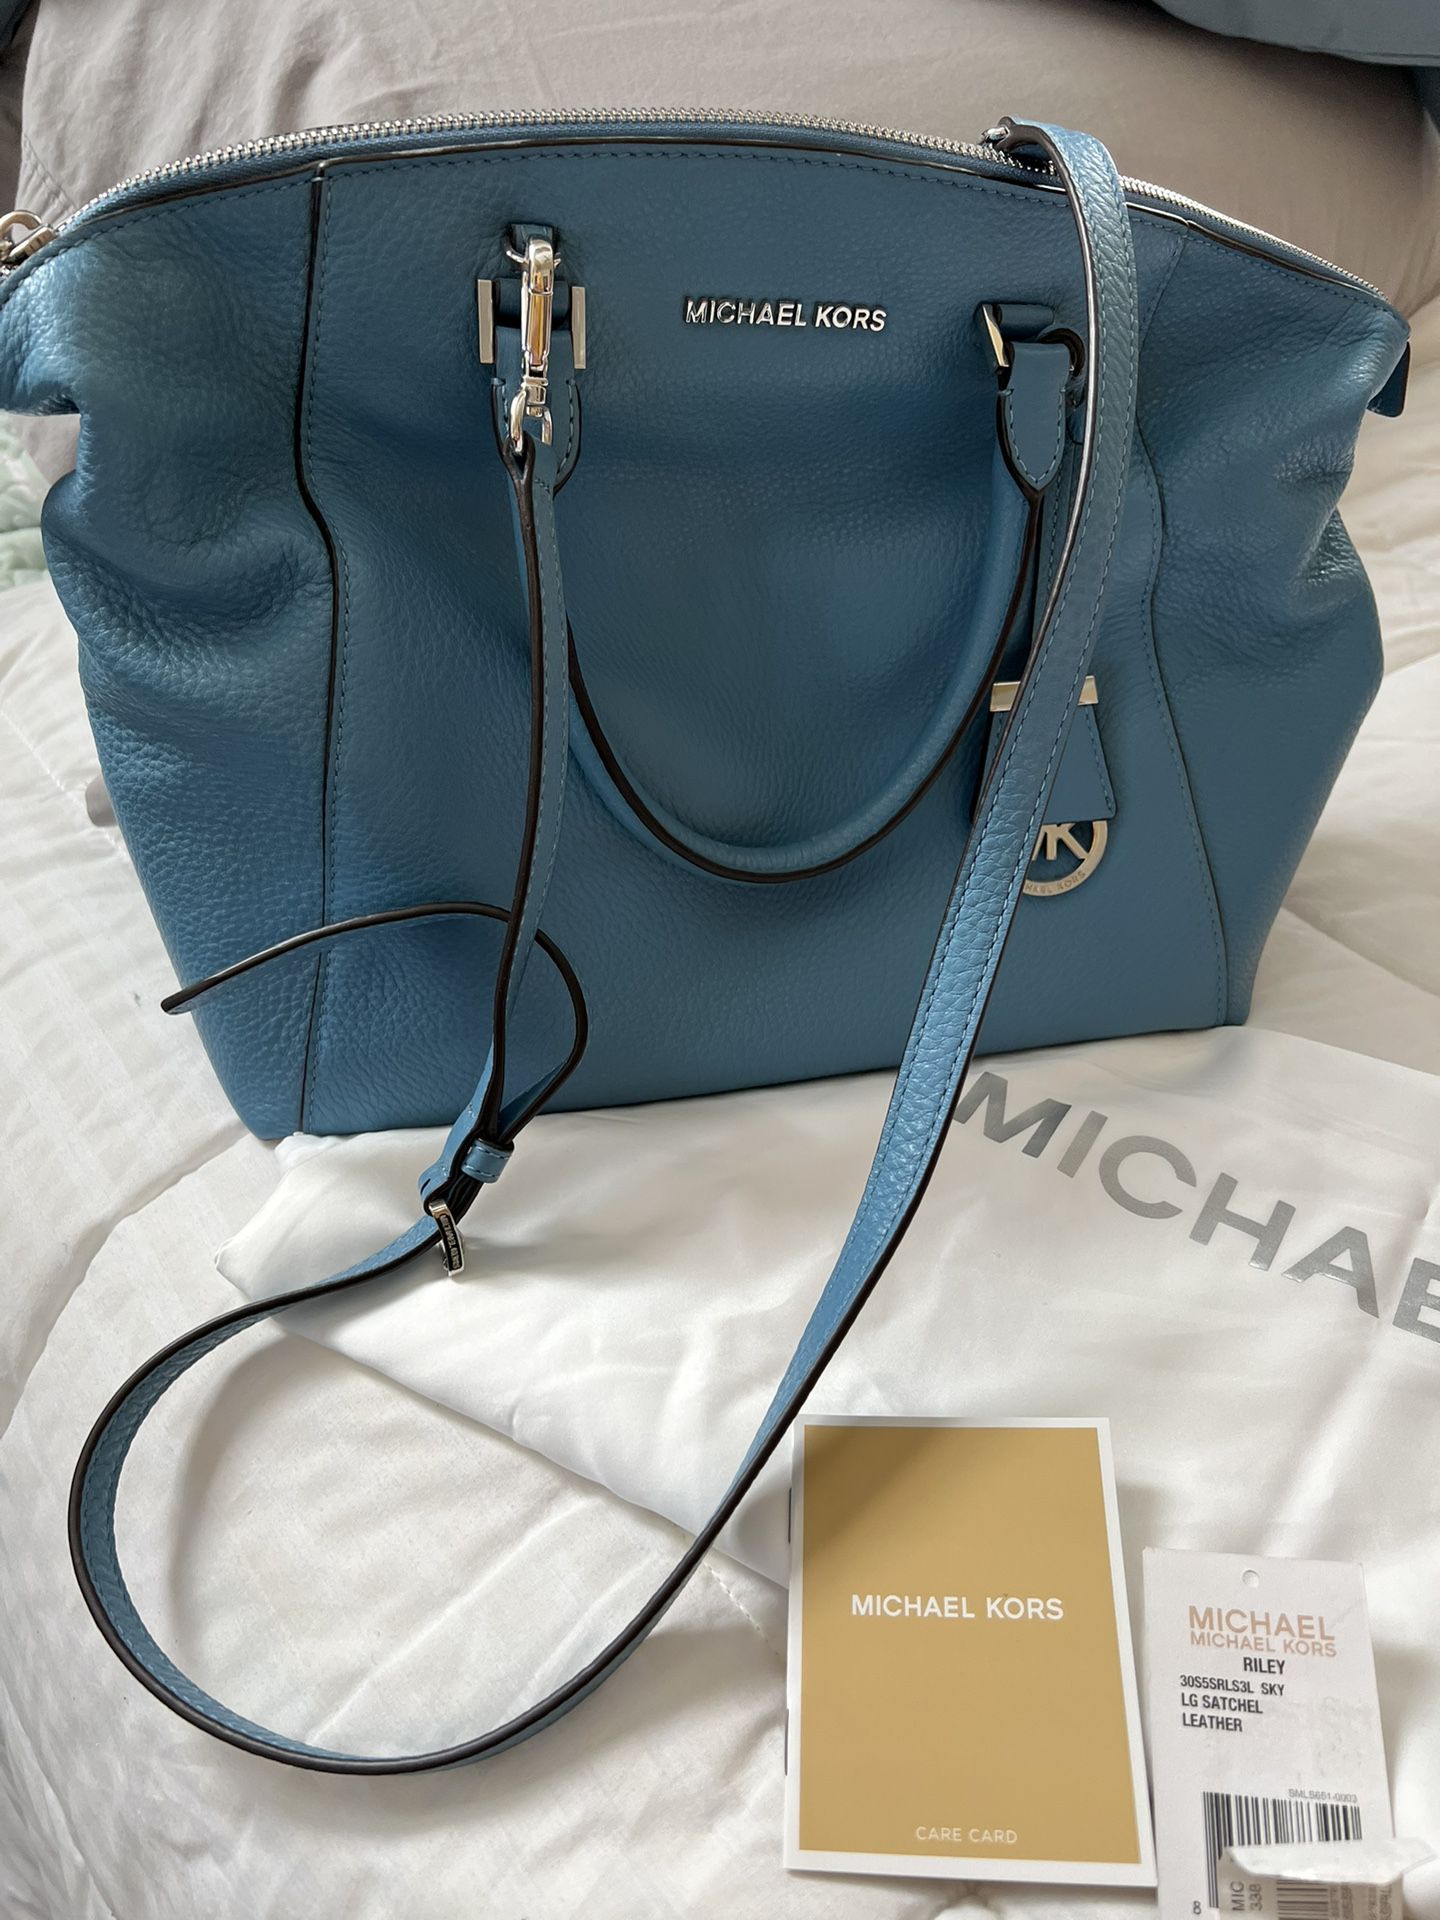 Michael Kors Riley Sky Blue Large Leather Satchel Tons of pockets Pristine Retail $368 Like New